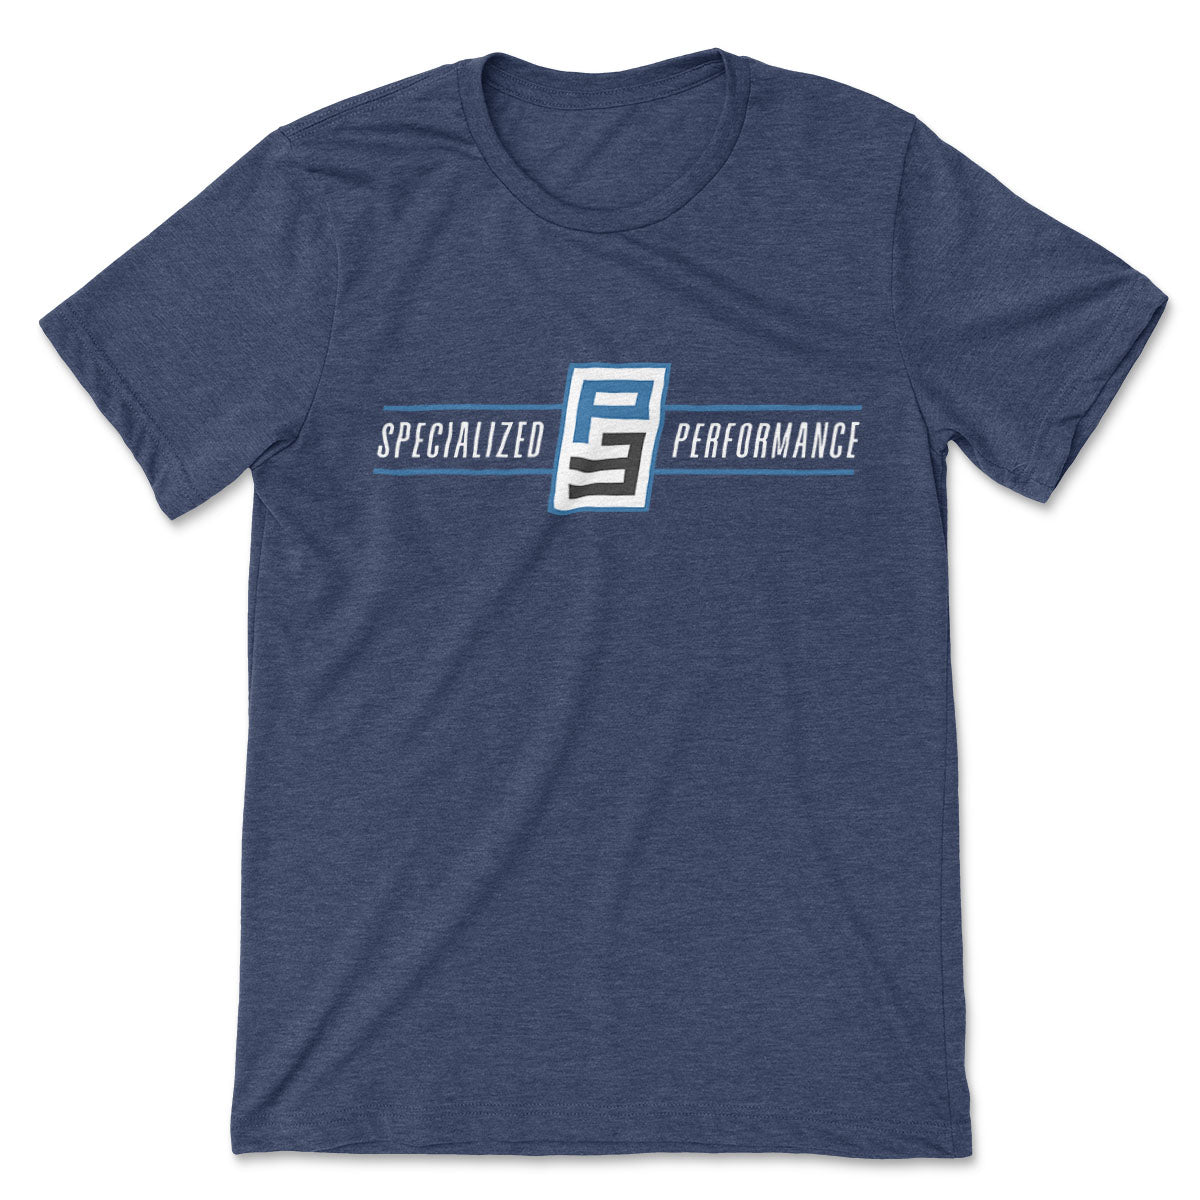 P3 Specialized Performance // Men's Tee